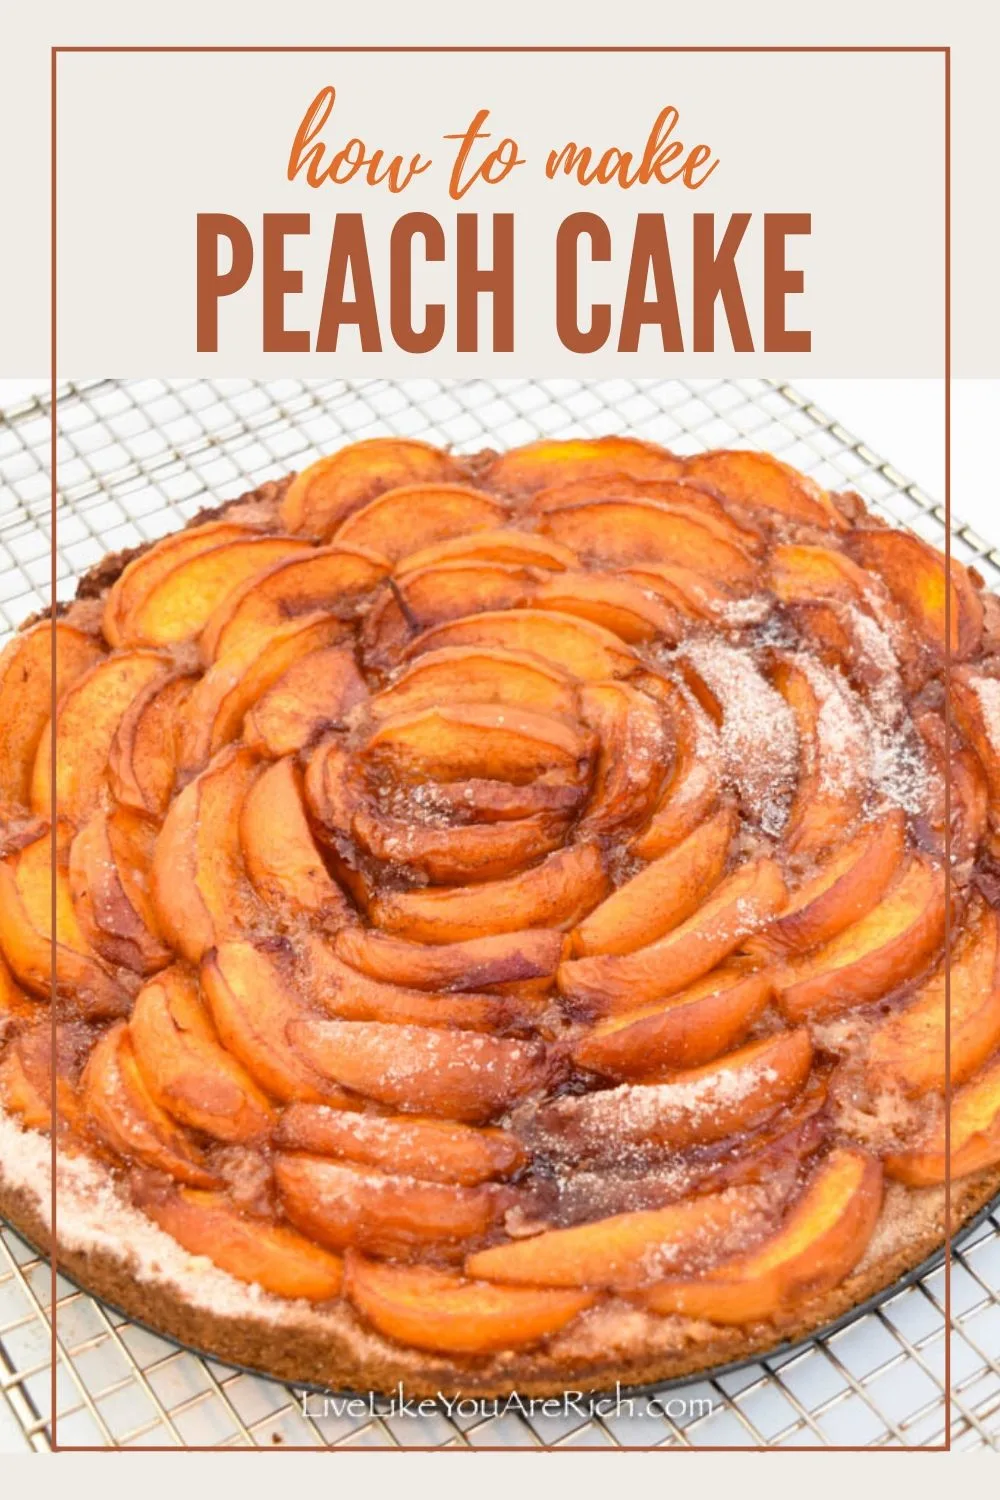 This Homemade German Peach Cake recipe is a combination of a deliciously moist lemon tart topped with sweet peaches baked to perfection. It is easy to make. My family and friends really love it.